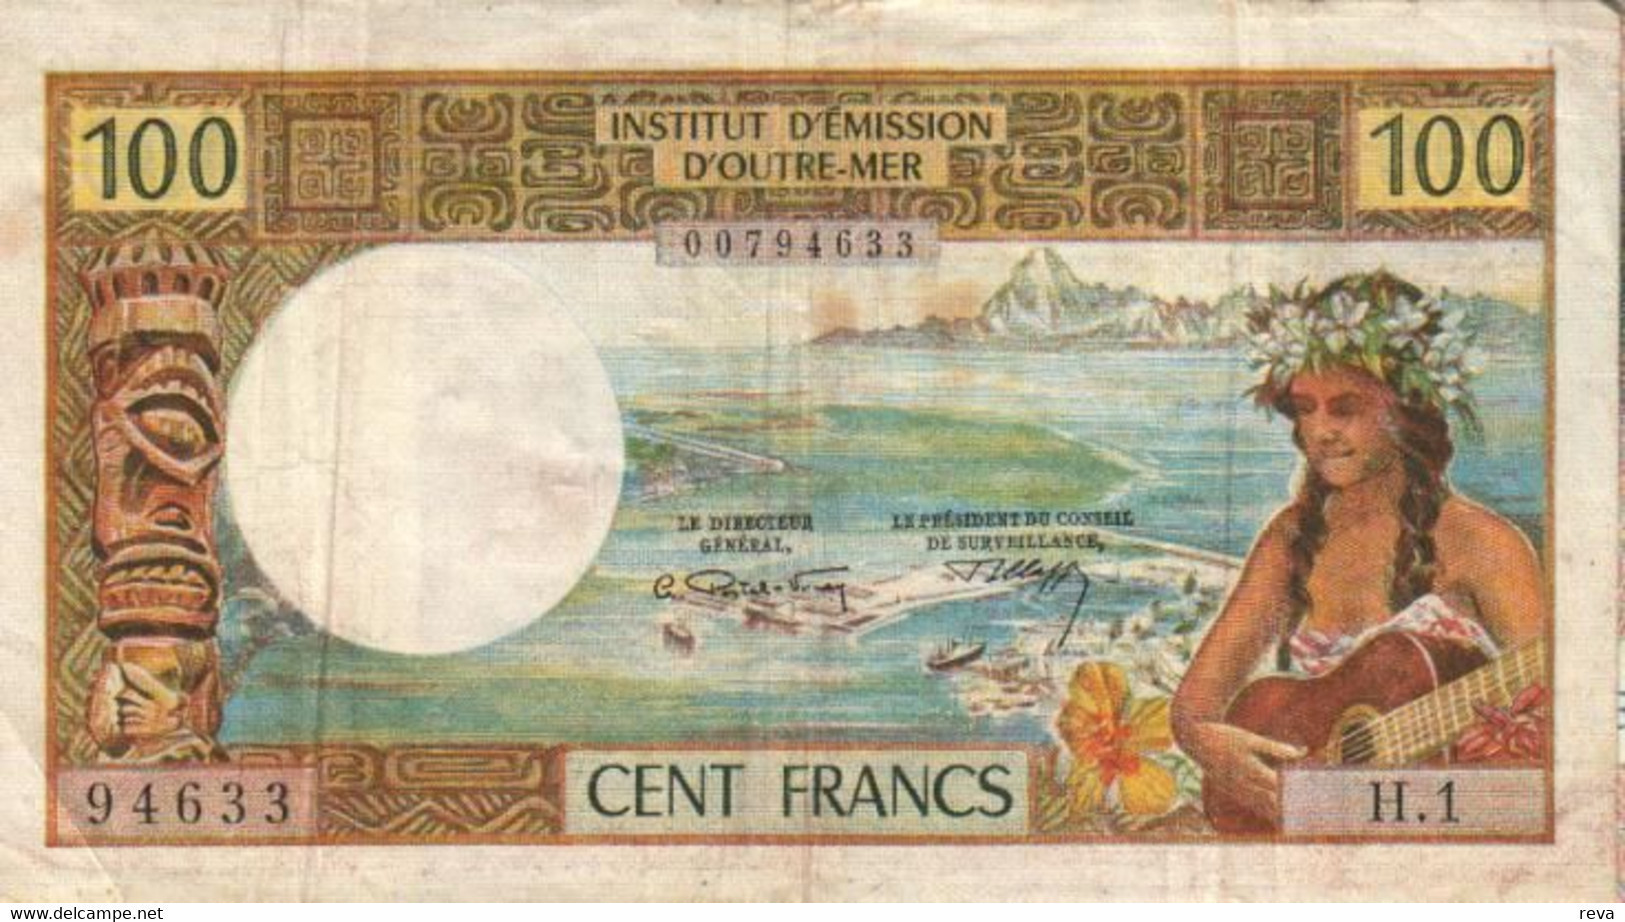 NEW CALEDONIA 100 FRANCS BROWN WOMAN HEAD FRONT &  BACK NOT DATED(1971) P61a SIG VARIETY F+ READ DESCRIPTION!! - Numea (Nueva Caledonia 1873-1985)